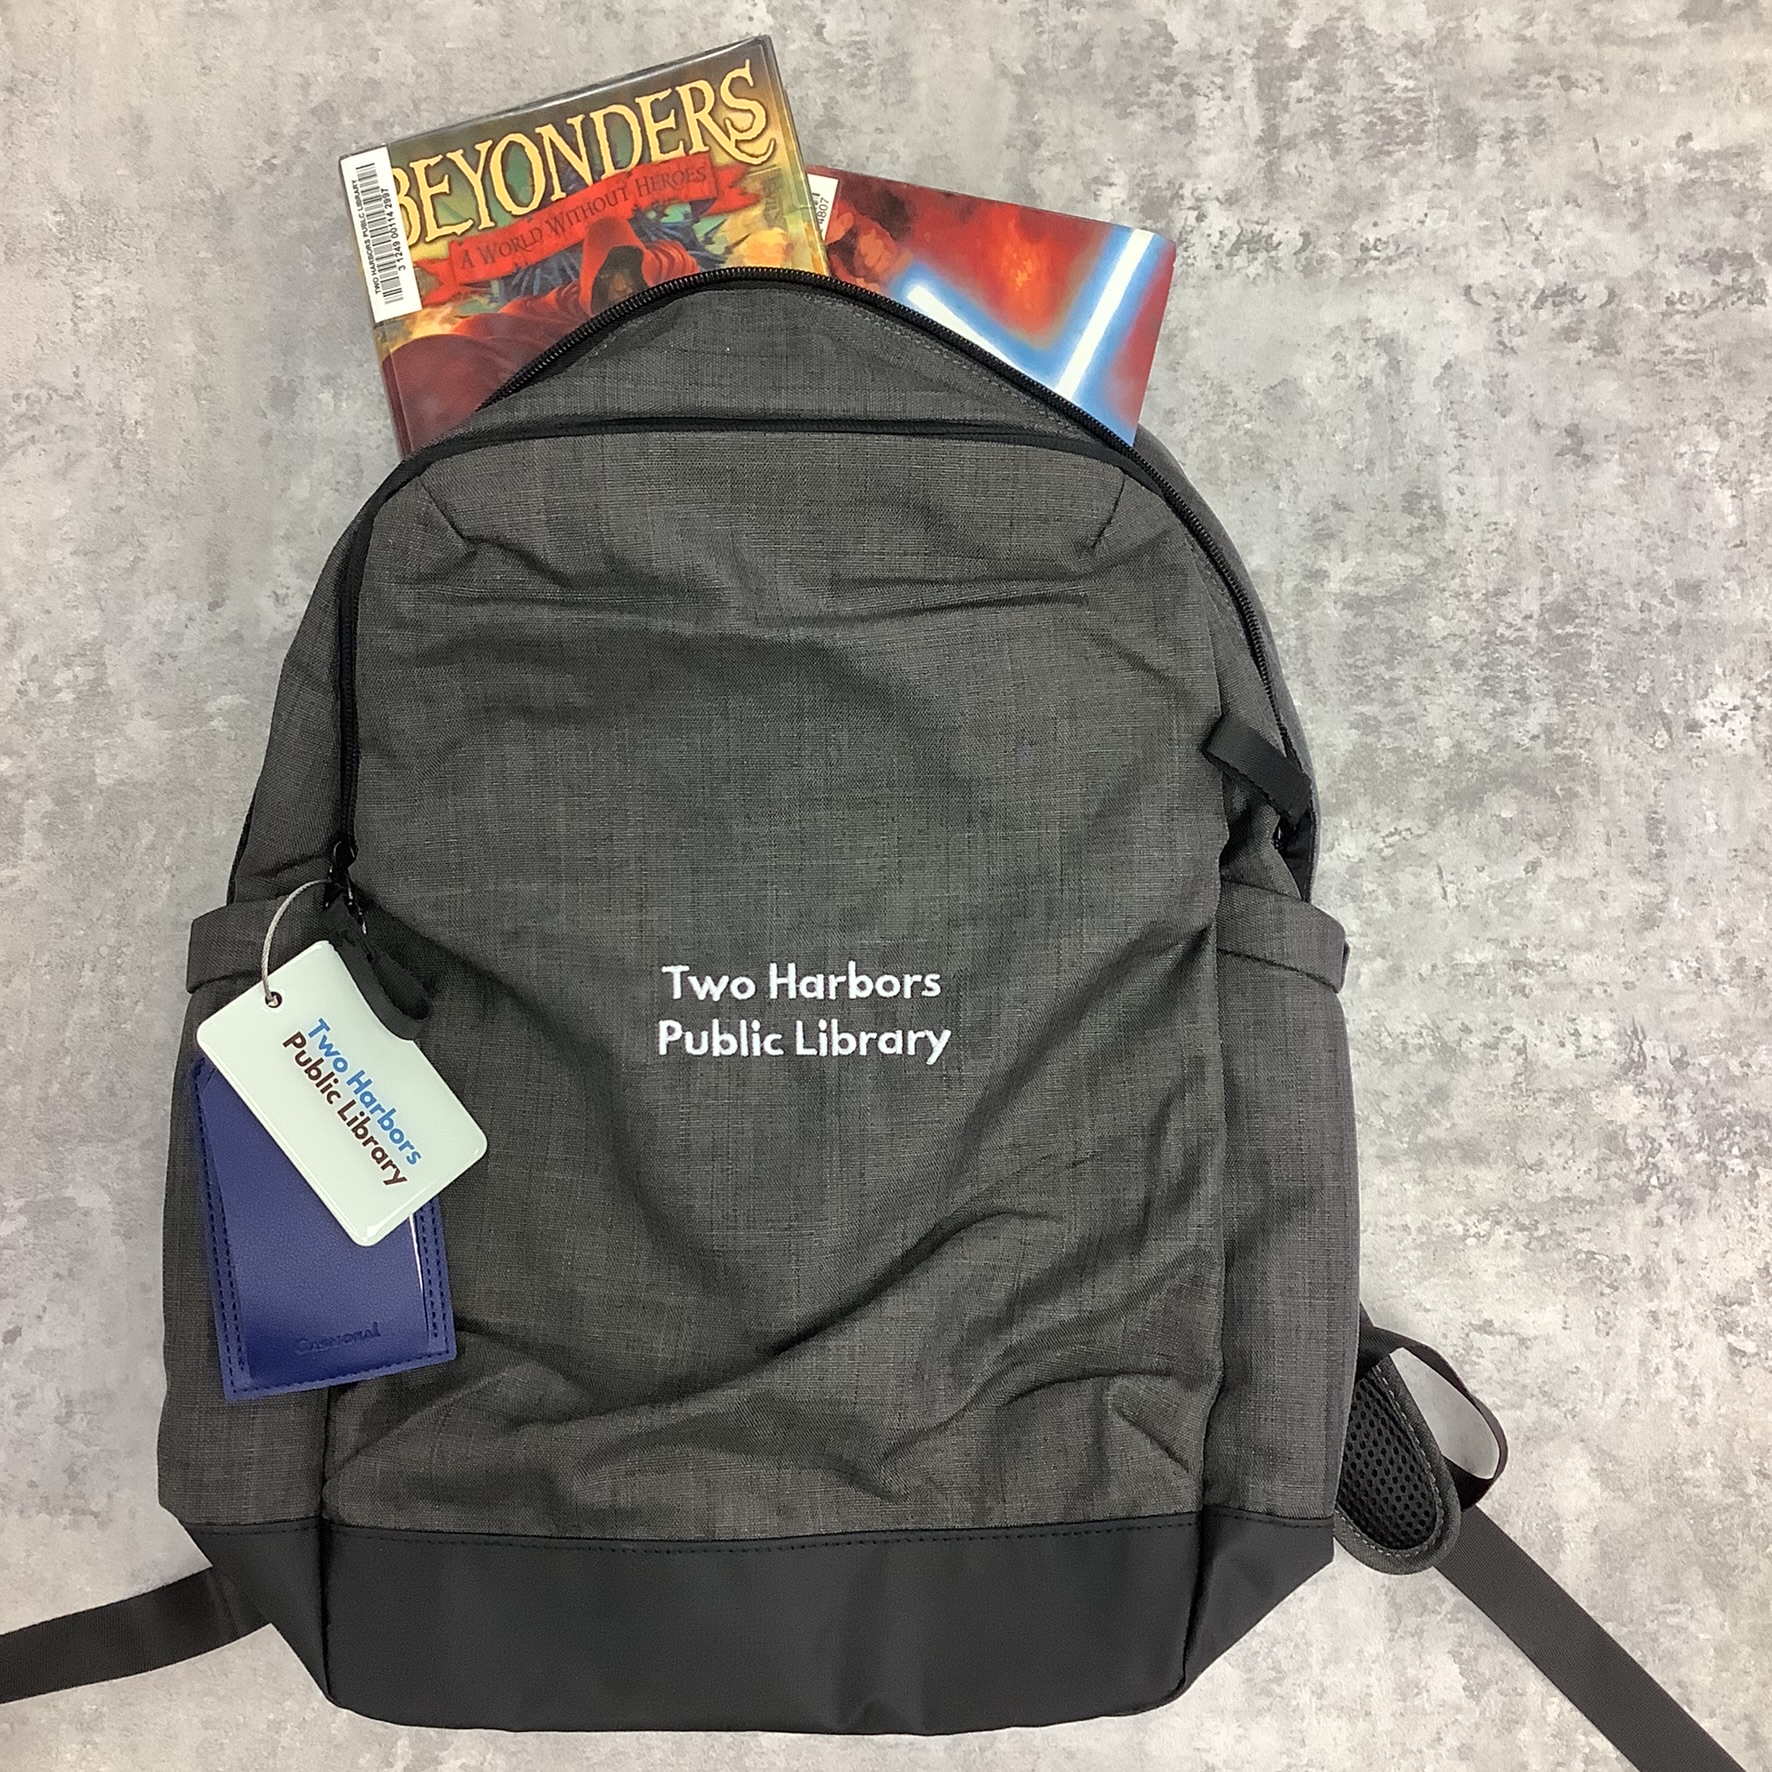 Borrowers' Backpack with two books peeking out